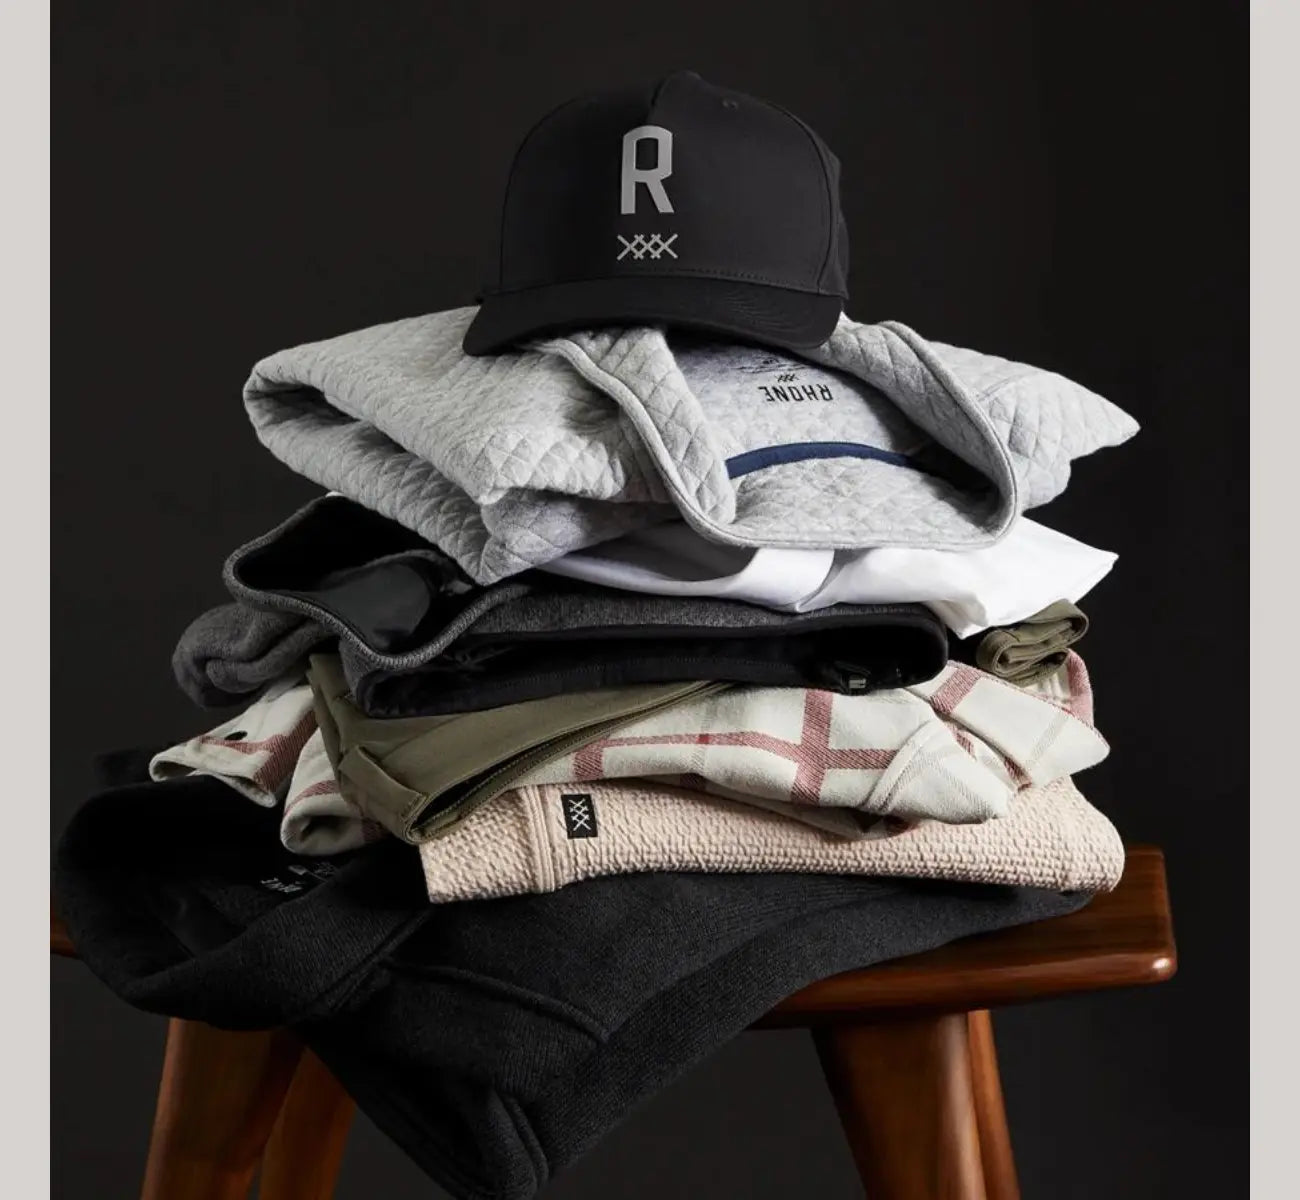 rhone clothing stacked in a pile